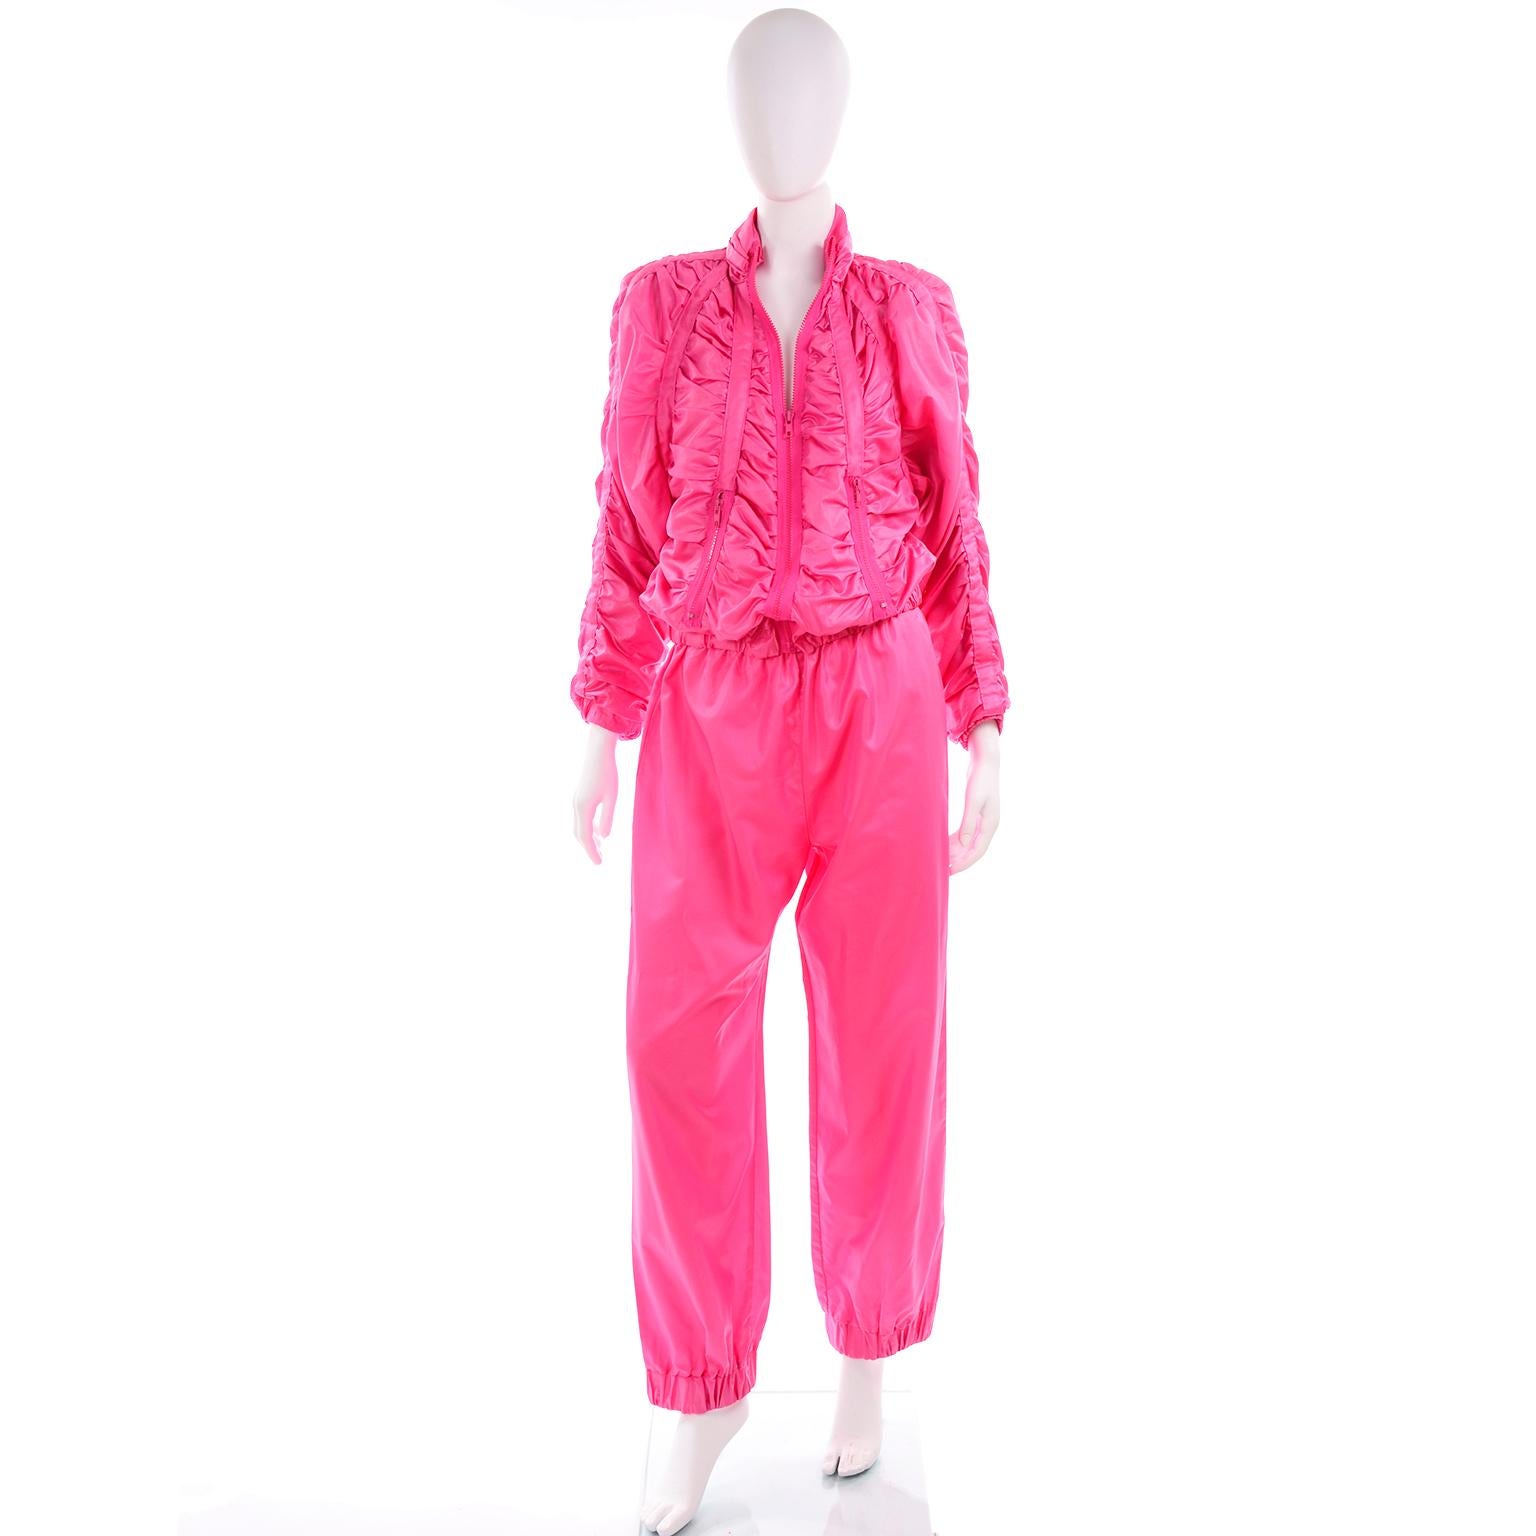 This vintage 1980's tracksuit designed by Antonio Ruspoli is truly one of our favorite athleisure outfits! The zip front sweatshirt style jacket has panels that are gathered to create a ruching effect. There are dolman style sleeves, a gathered